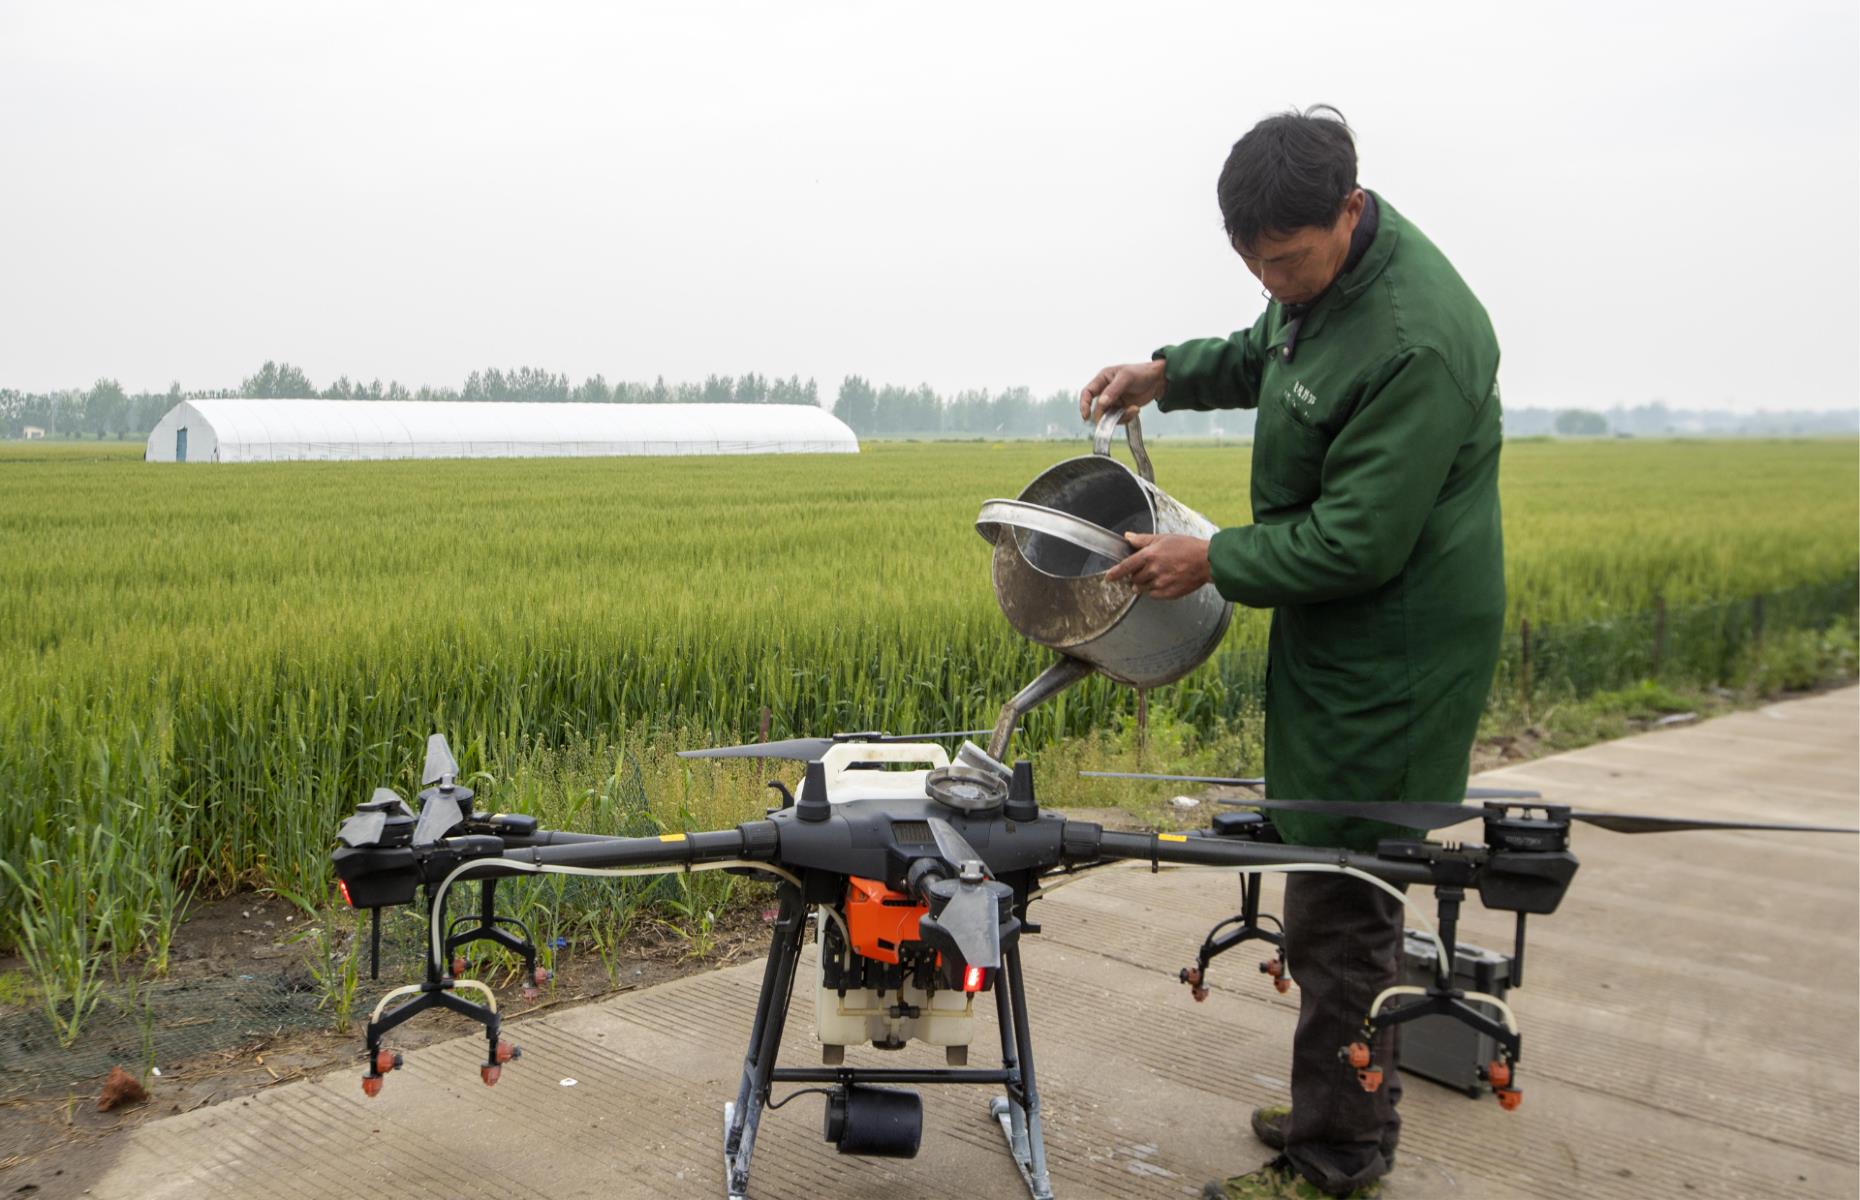 Drone duty: making agriculture more efficient